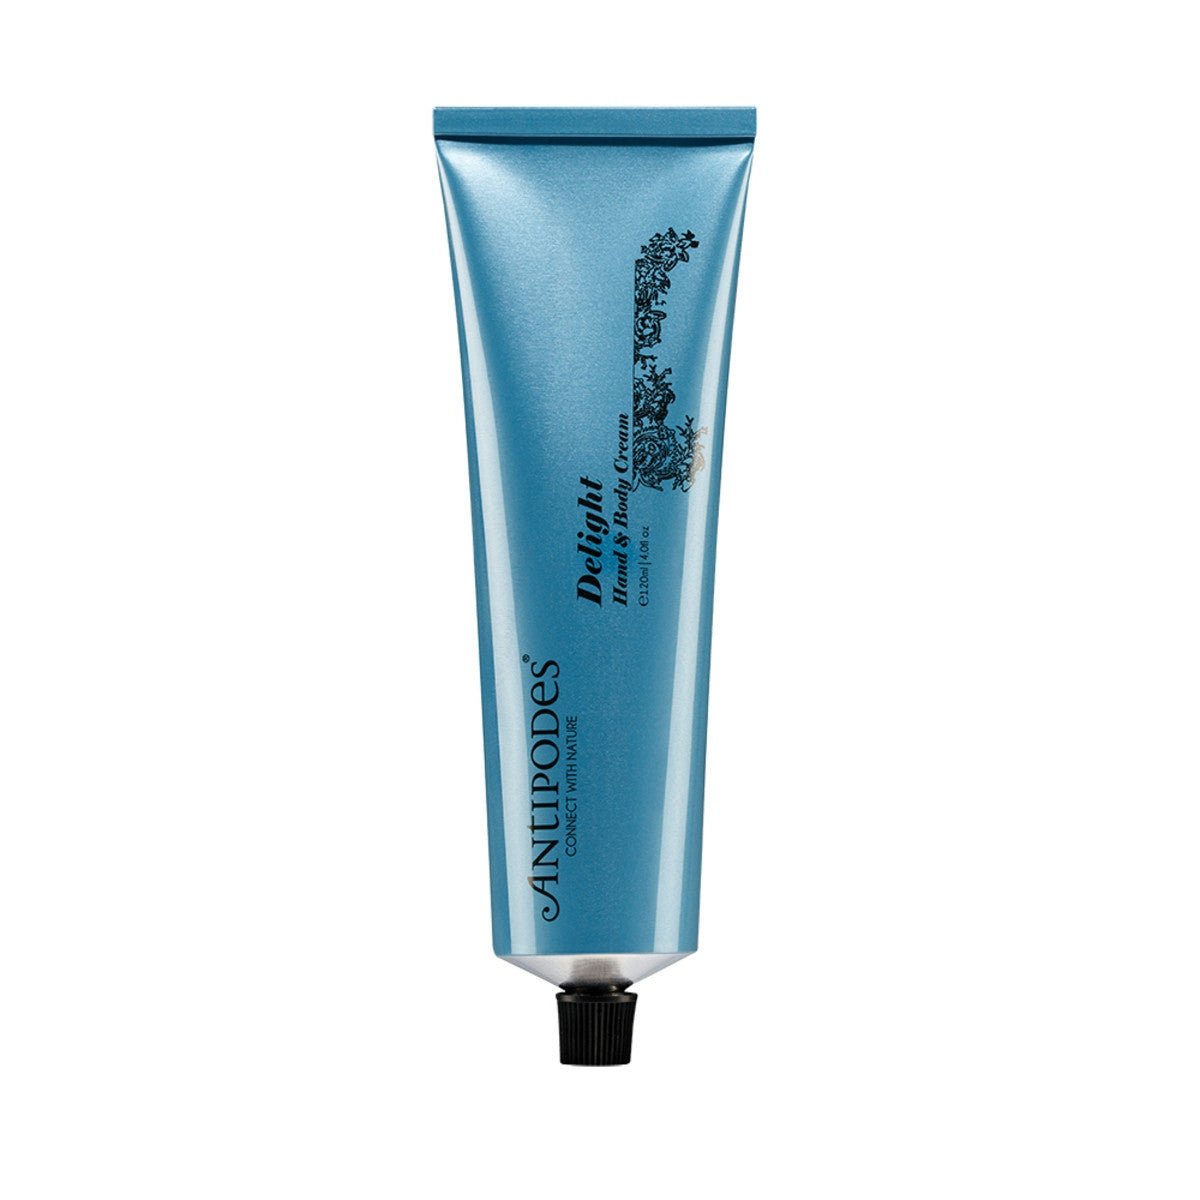 image of Antipodes Delight Hand & Body Cream 120ml on white background